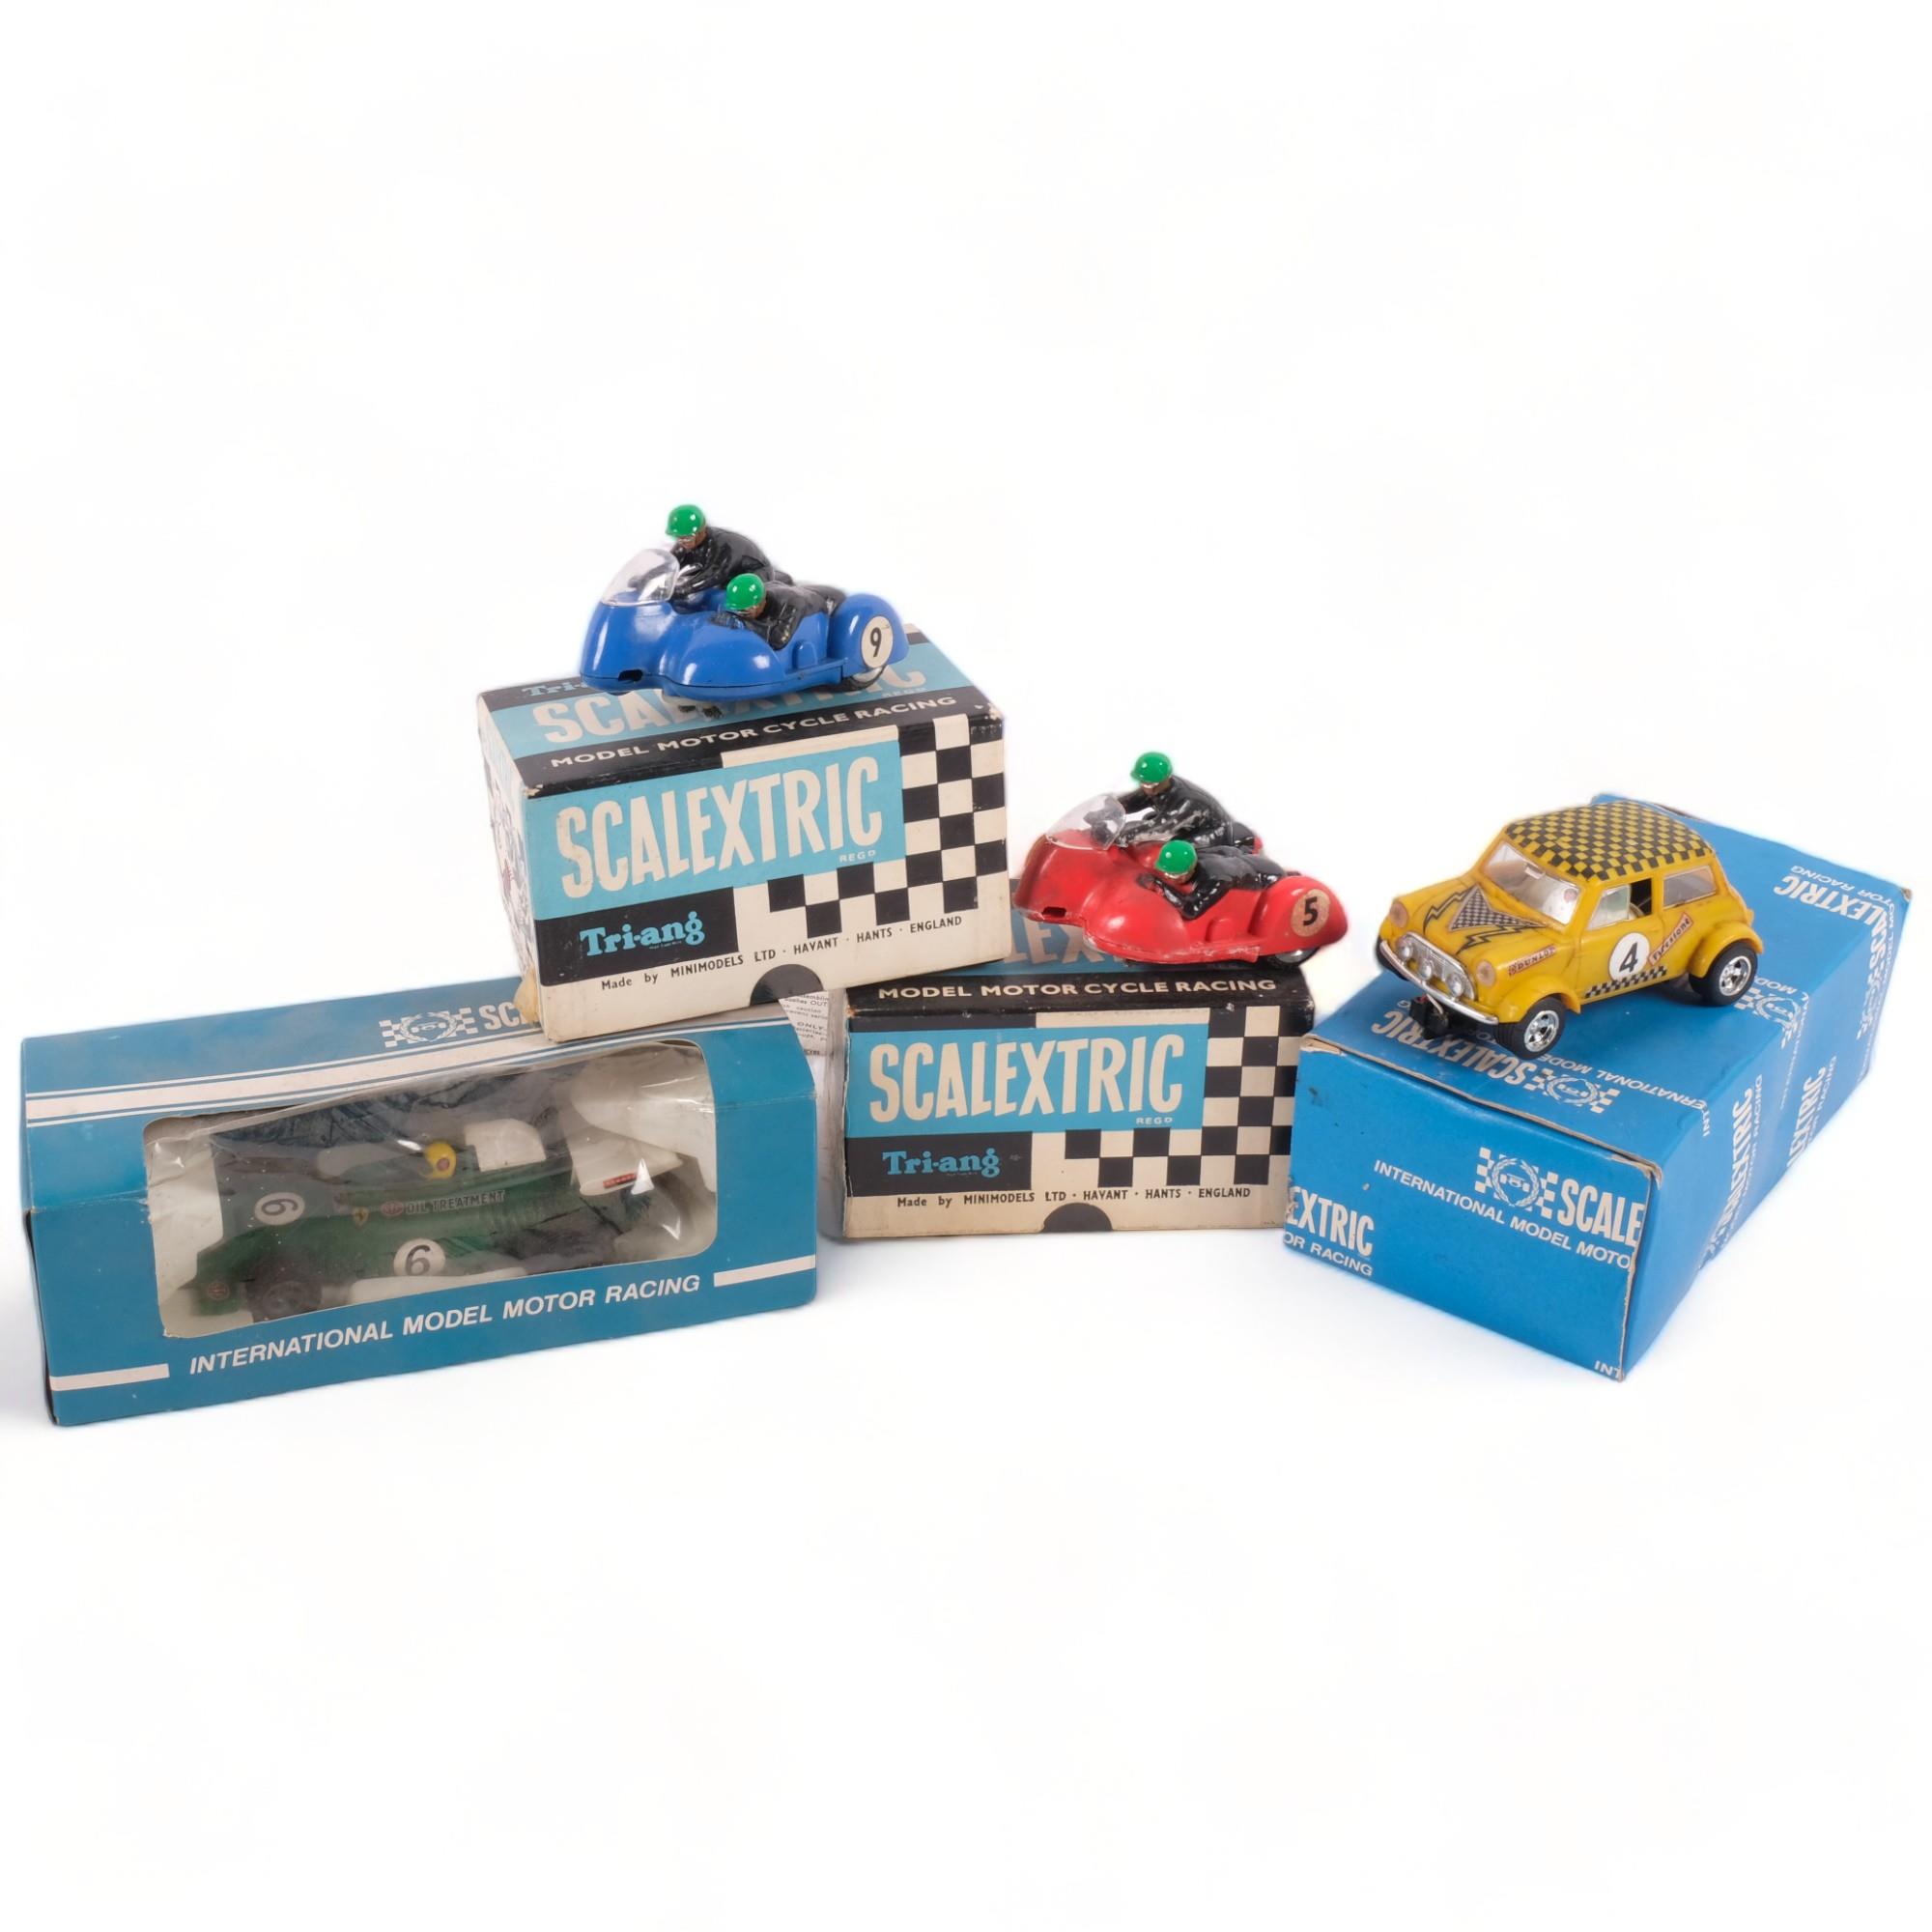 2 boxed Tri-ang Scalextric motor cycle racing typhoons, a Mini, and a boxed BRM